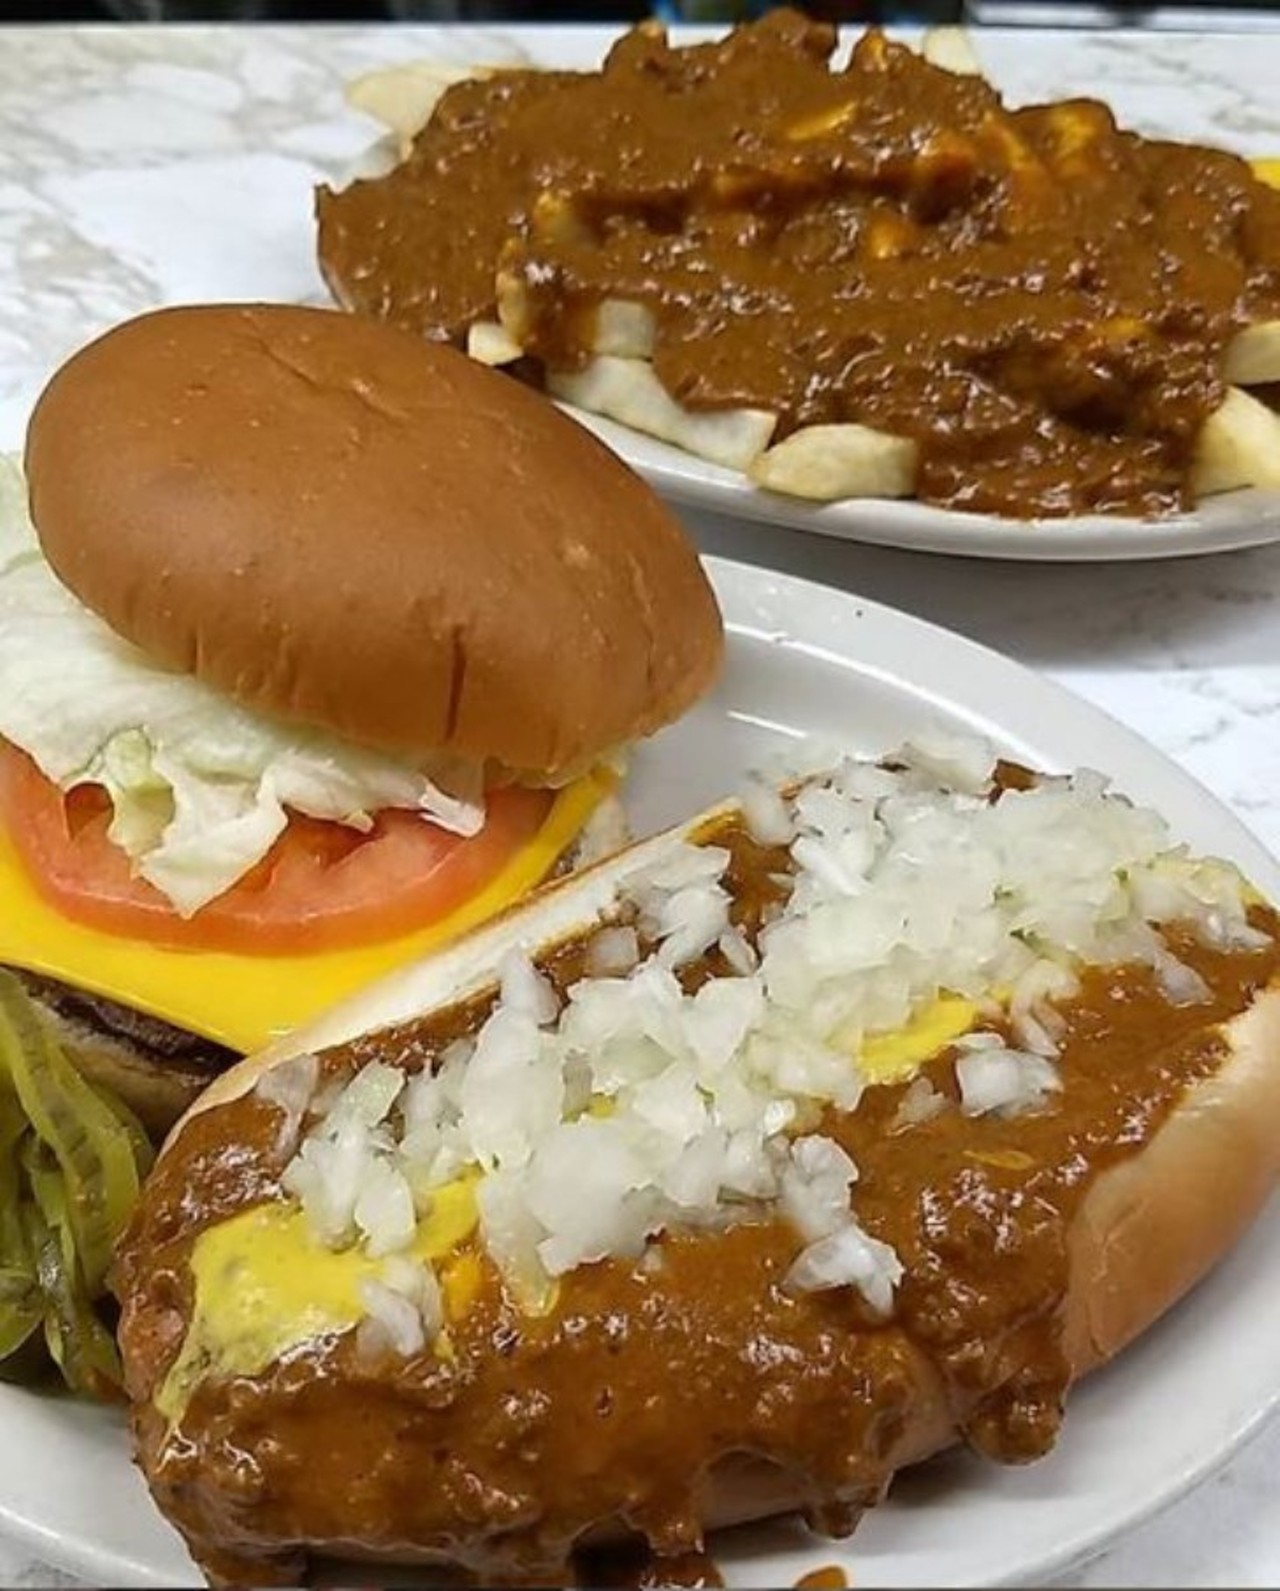 Duly&#146;s Place
5458 W. Vernor Hwy; Detroit; 313-554-3076
Made famous by the late Anthony Bourdain, this southwest Detroit staple competes with the other Coneys such as American and Lafayette. Enjoy one of their coney dogs or their all-day breakfast.
Photo courtesy of Instagram user kbinug